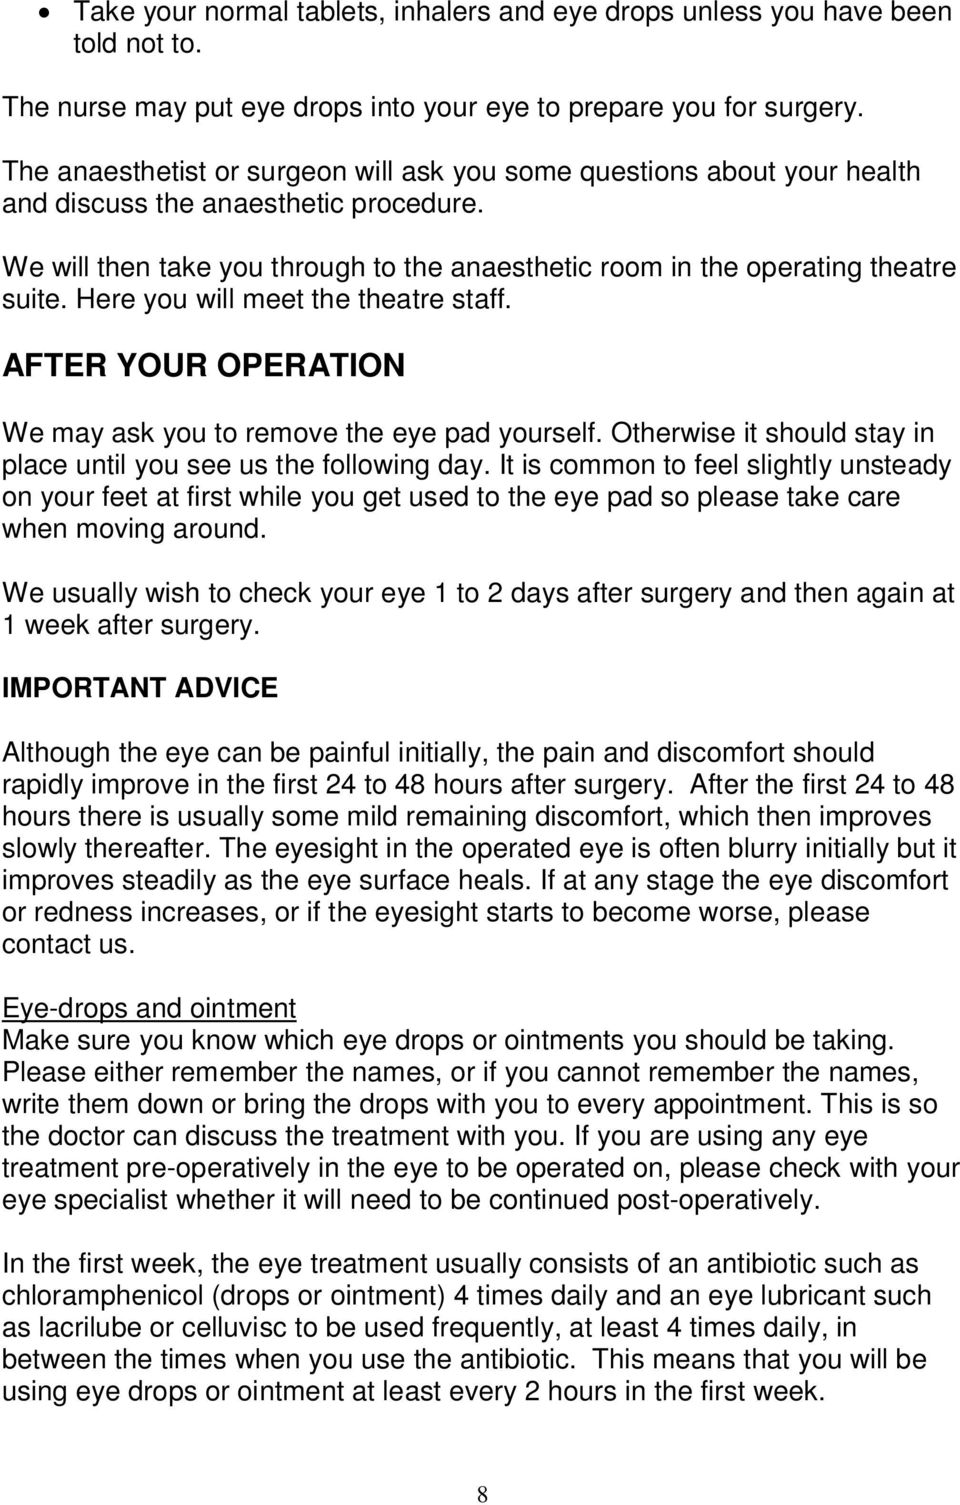 Here you will meet the theatre staff. AFTER YOUR OPERATION We may ask you to remove the eye pad yourself. Otherwise it should stay in place until you see us the following day.